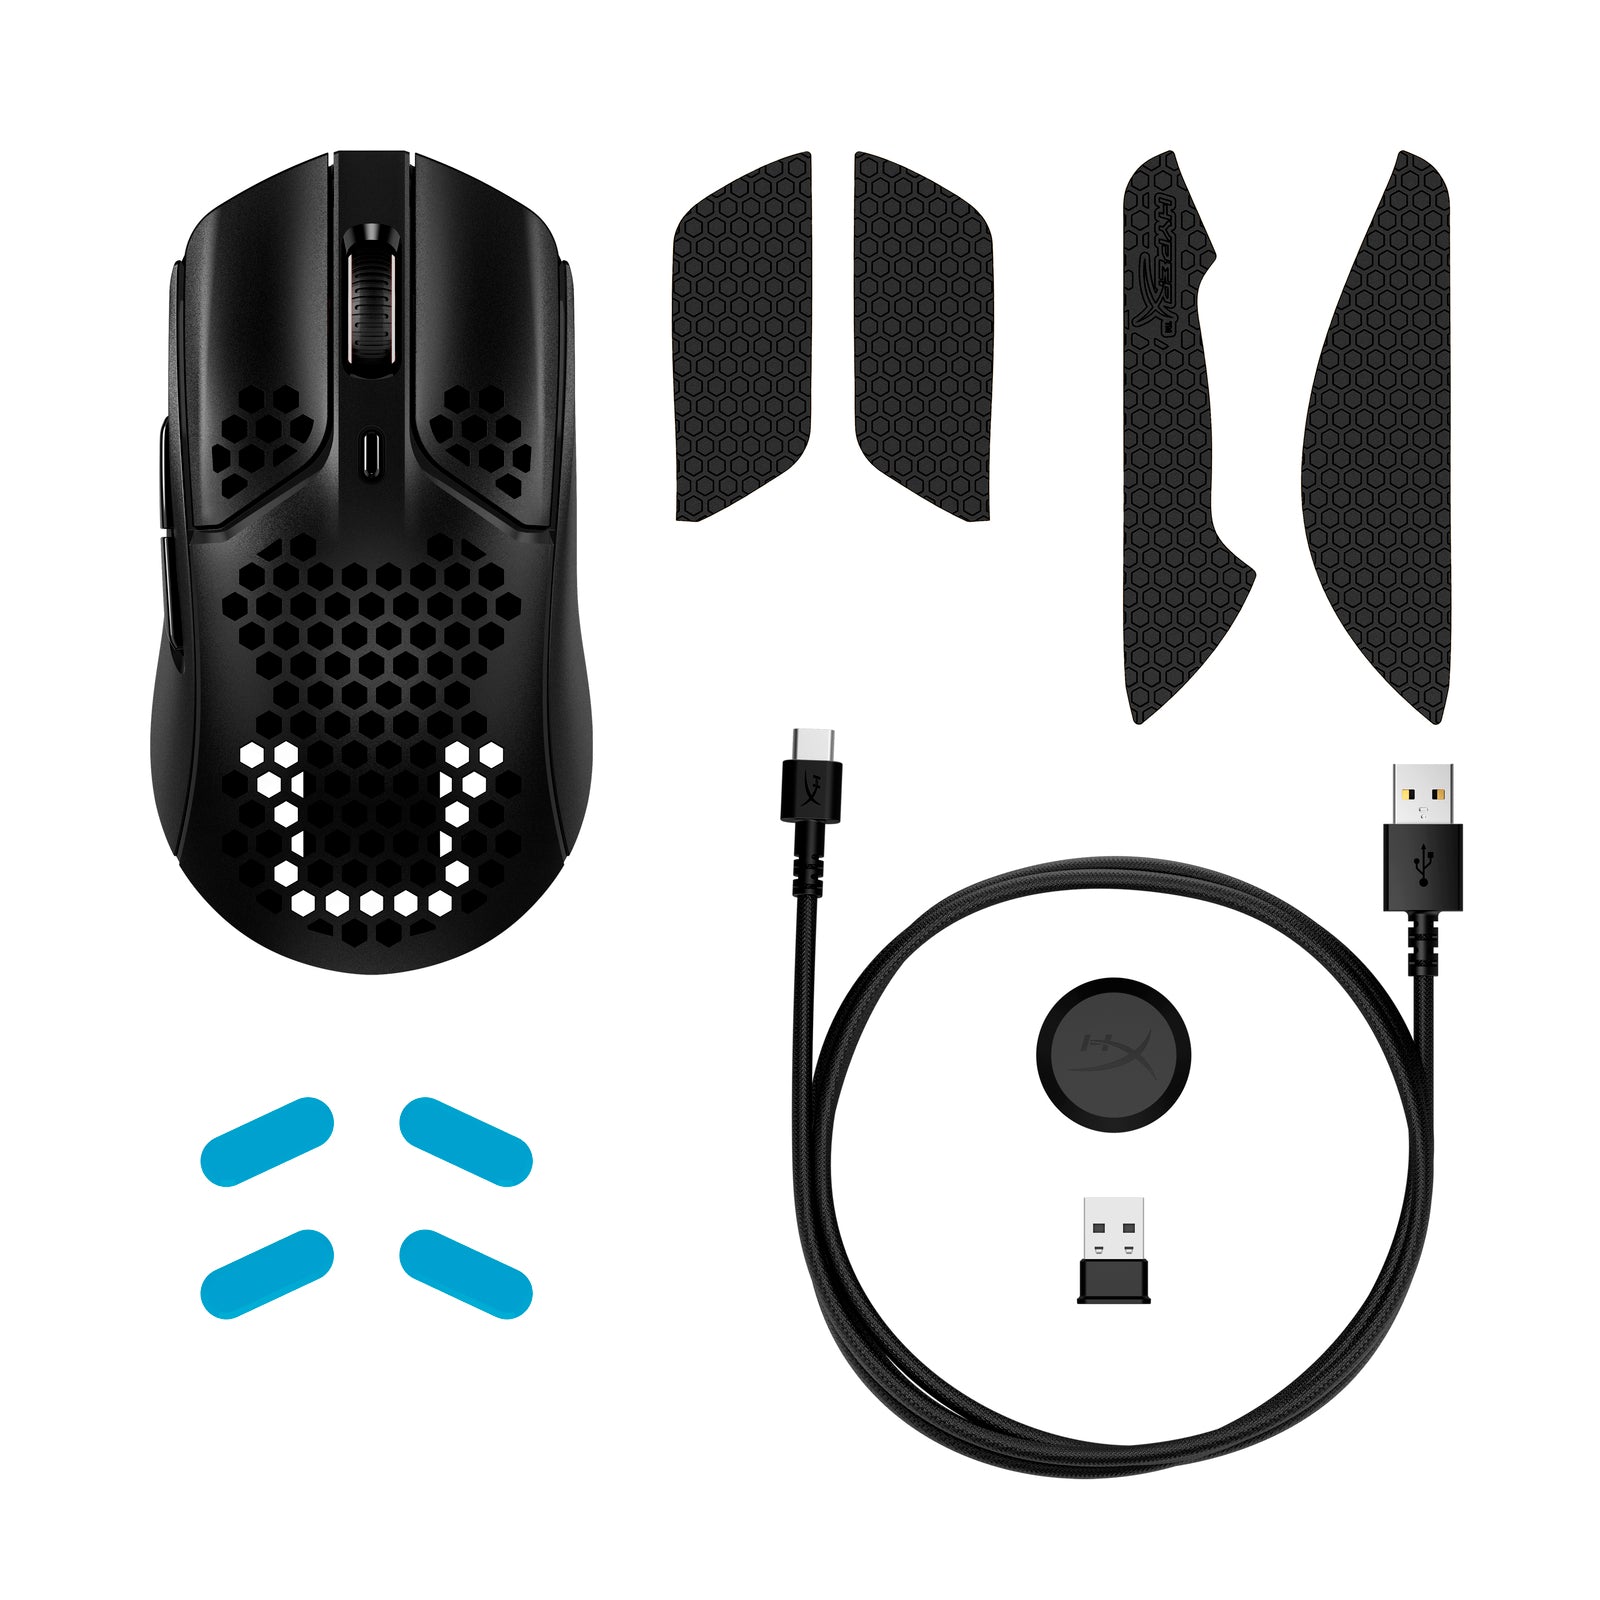 HyperX Pulsefire Haste Wireless Black gaming mouse, front view, featuring the accessories and contents such as the skates, additional grips, sub c charging cable and dongle